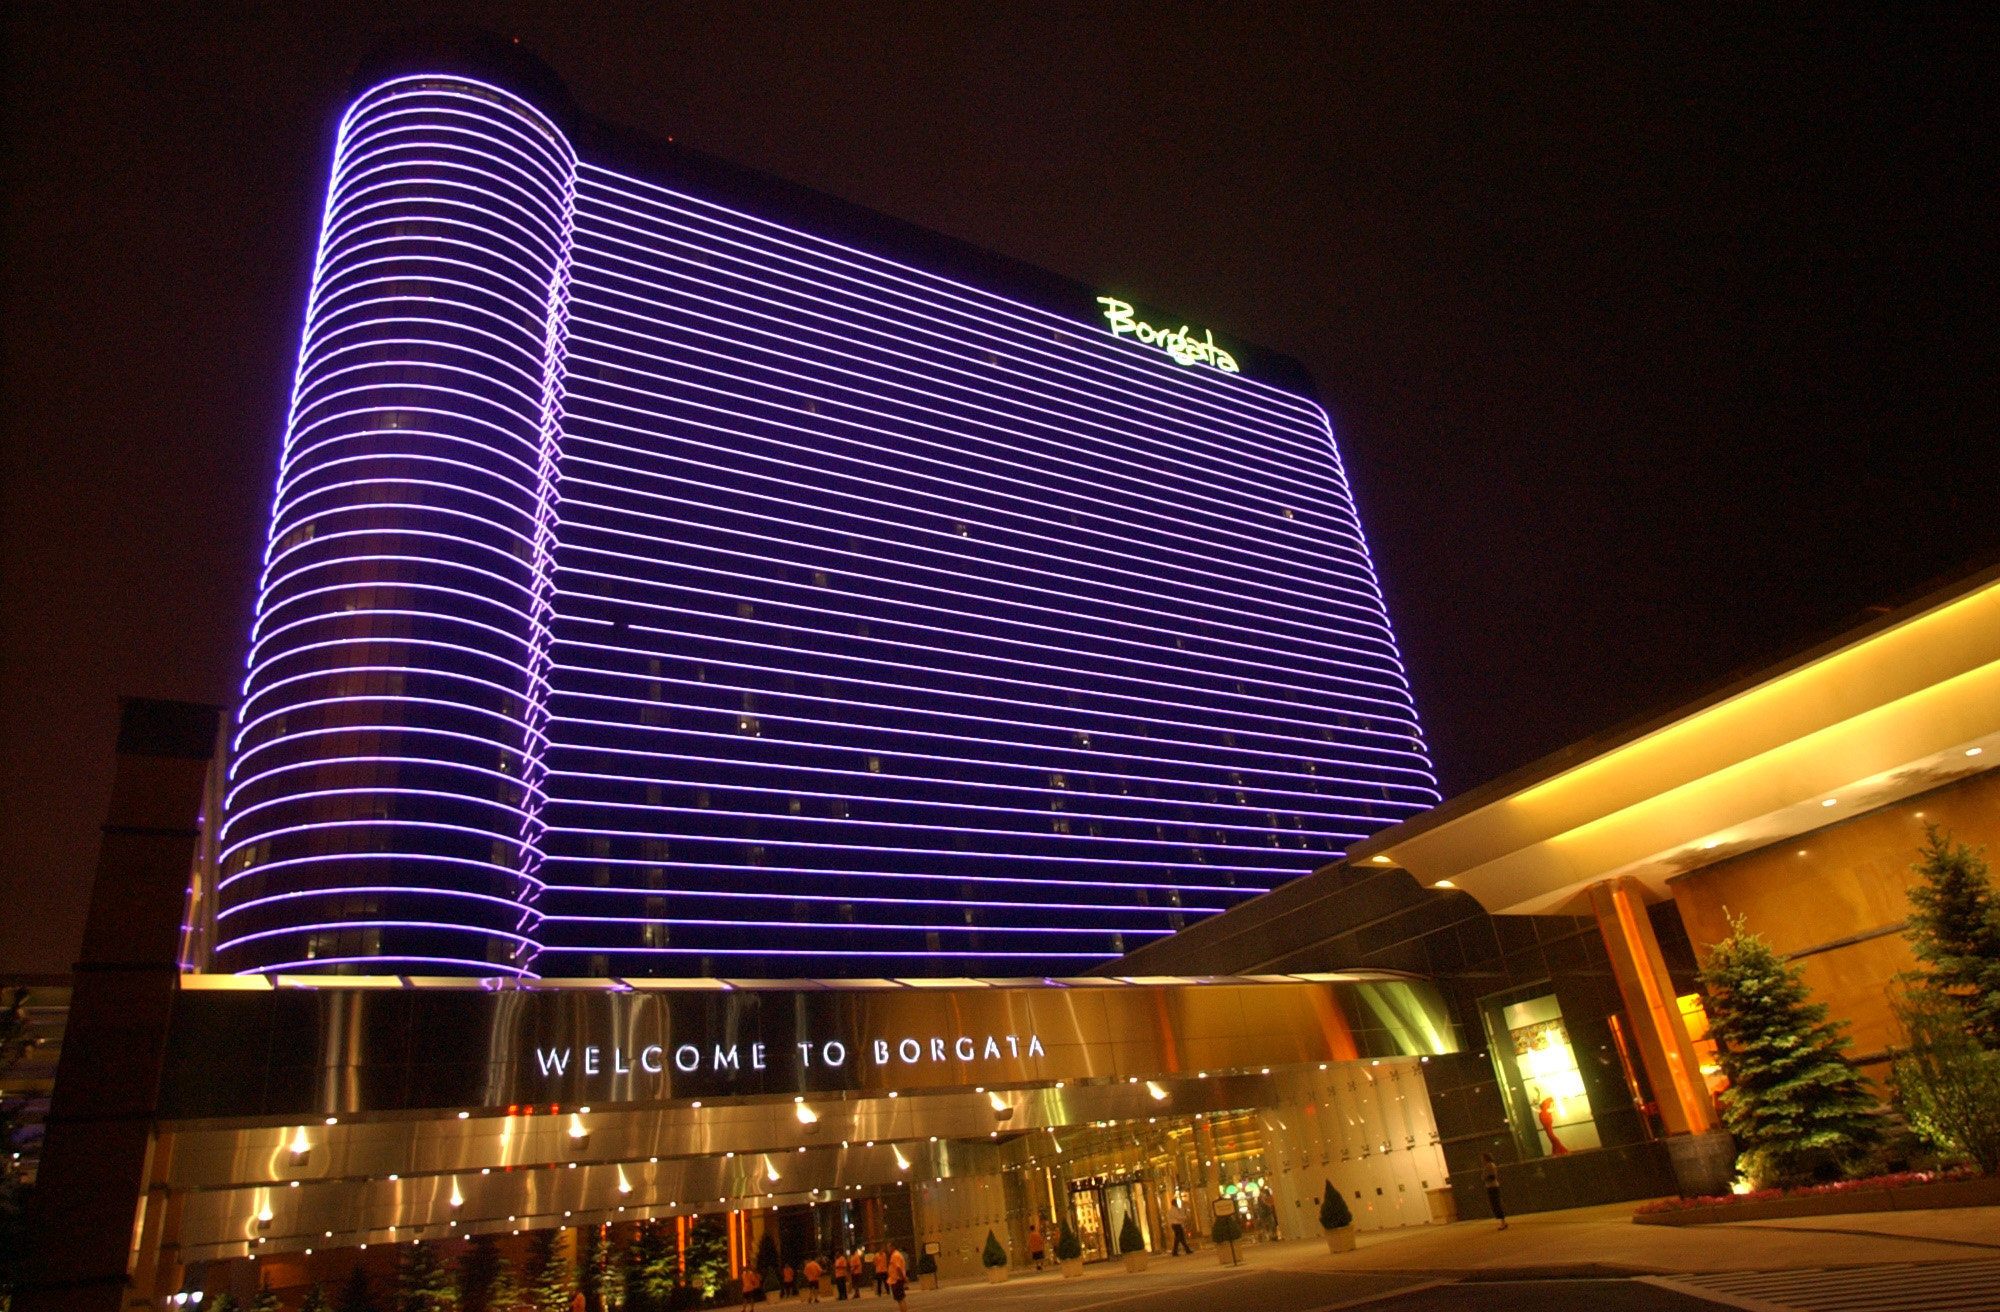 Borgata, soon to be accepting sports bets